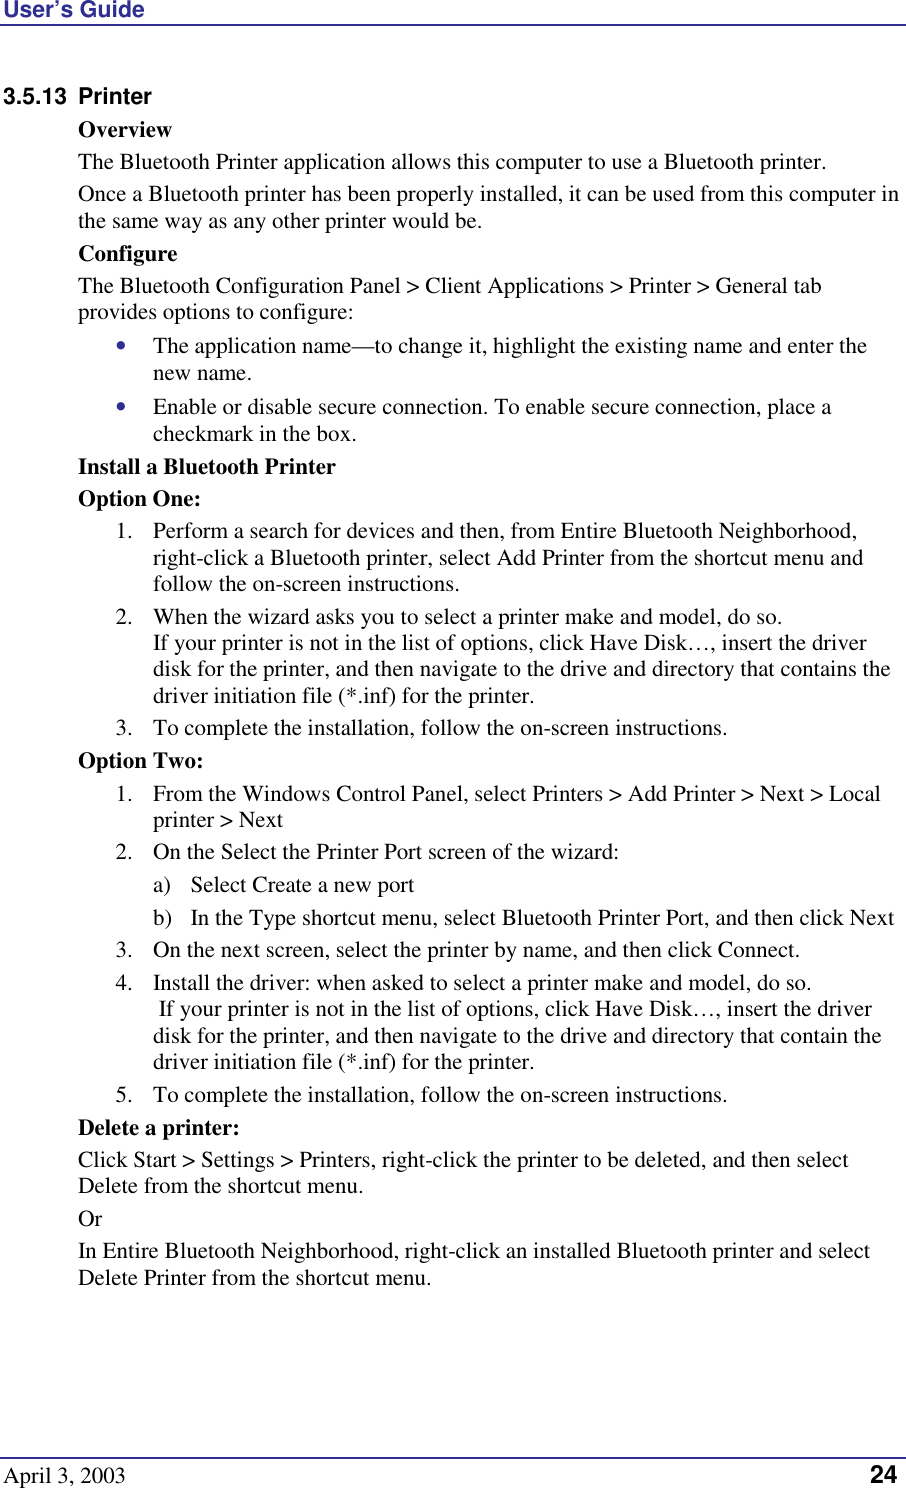 User’s Guide April 3, 2003   24 3.5.13 Printer Overview The Bluetooth Printer application allows this computer to use a Bluetooth printer. Once a Bluetooth printer has been properly installed, it can be used from this computer in the same way as any other printer would be. Configure The Bluetooth Configuration Panel &gt; Client Applications &gt; Printer &gt; General tab provides options to configure: •  The application name—to change it, highlight the existing name and enter the new name. •  Enable or disable secure connection. To enable secure connection, place a checkmark in the box. Install a Bluetooth Printer Option One: 1.  Perform a search for devices and then, from Entire Bluetooth Neighborhood, right-click a Bluetooth printer, select Add Printer from the shortcut menu and follow the on-screen instructions.  2.  When the wizard asks you to select a printer make and model, do so.  If your printer is not in the list of options, click Have Disk…, insert the driver disk for the printer, and then navigate to the drive and directory that contains the driver initiation file (*.inf) for the printer. 3.  To complete the installation, follow the on-screen instructions. Option Two: 1.  From the Windows Control Panel, select Printers &gt; Add Printer &gt; Next &gt; Local printer &gt; Next 2.  On the Select the Printer Port screen of the wizard: a)  Select Create a new port b)  In the Type shortcut menu, select Bluetooth Printer Port, and then click Next 3.  On the next screen, select the printer by name, and then click Connect.  4.  Install the driver: when asked to select a printer make and model, do so.  If your printer is not in the list of options, click Have Disk…, insert the driver disk for the printer, and then navigate to the drive and directory that contain the driver initiation file (*.inf) for the printer. 5.  To complete the installation, follow the on-screen instructions. Delete a printer: Click Start &gt; Settings &gt; Printers, right-click the printer to be deleted, and then select Delete from the shortcut menu. Or In Entire Bluetooth Neighborhood, right-click an installed Bluetooth printer and select Delete Printer from the shortcut menu.  